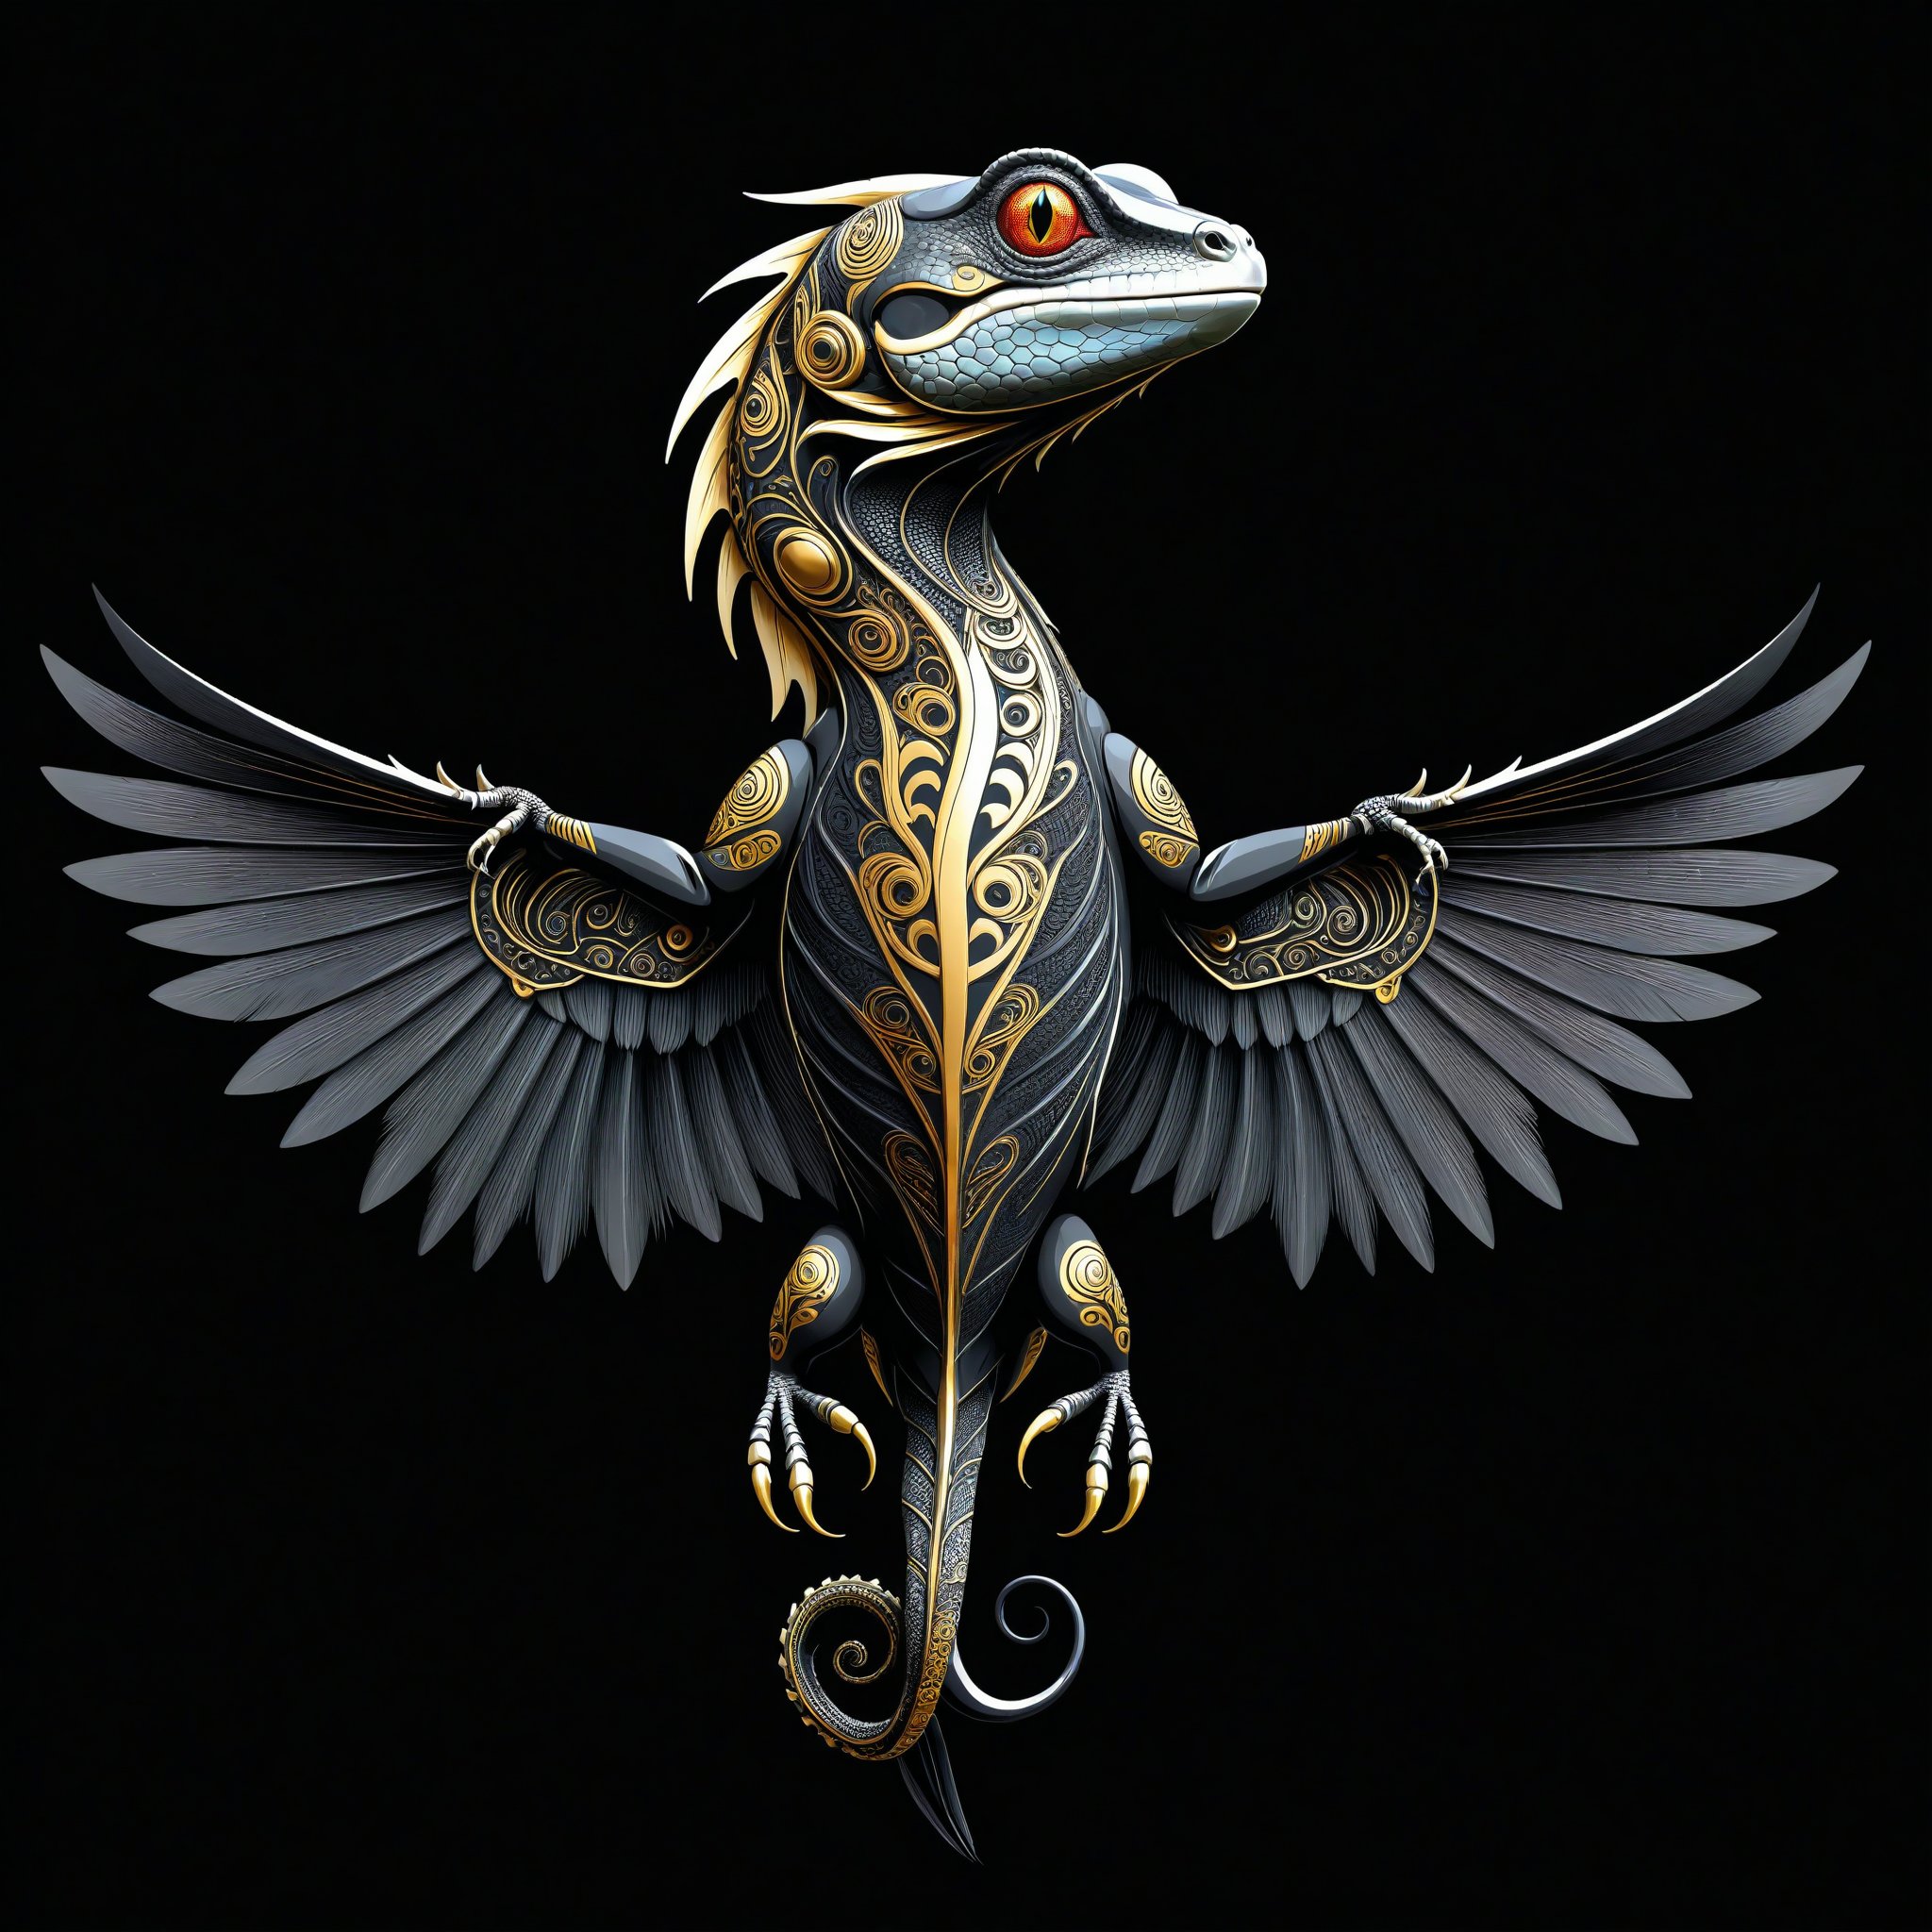 a lizard tribal whit wing majestic with clasic ornament Mechanical lines Elegance T-shirt design, BLACK BACKGROUND